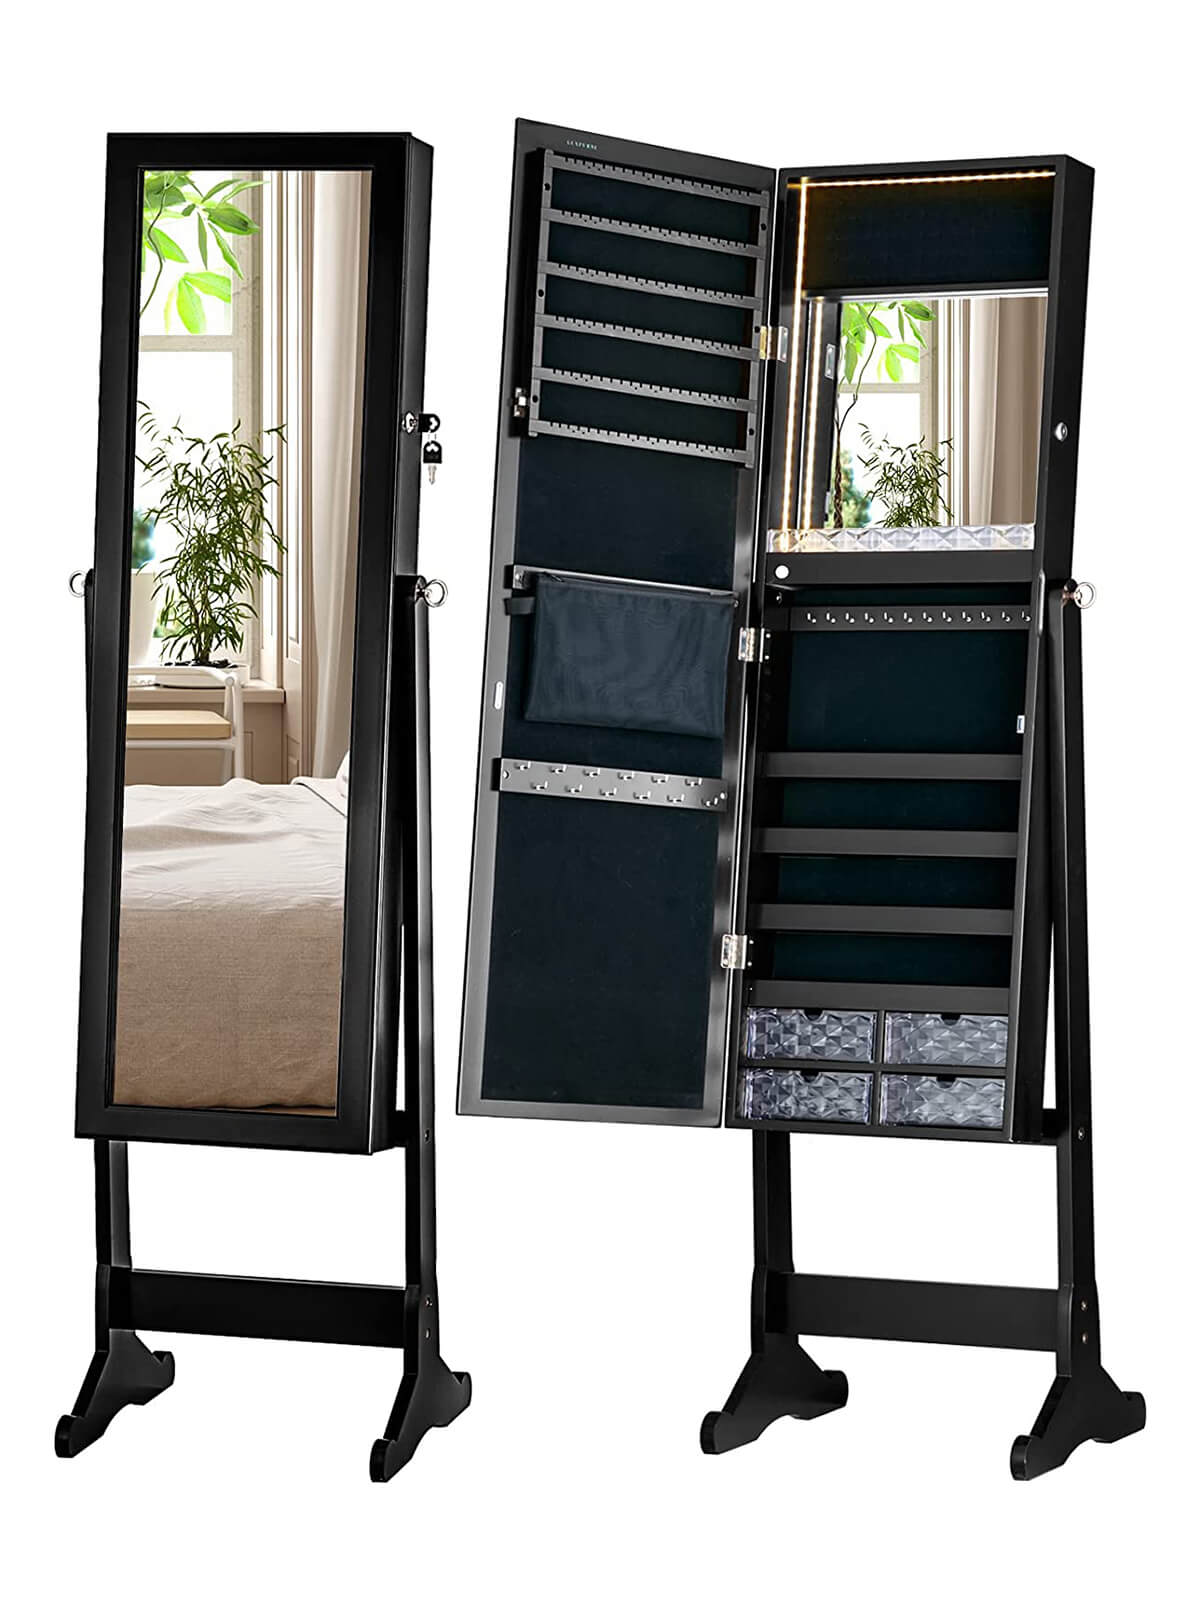 Luxfurni | Jewelry Armoire | Standing Stella 6s Jewelry Armoire Full Length Mirror With Built-in Lights - Black